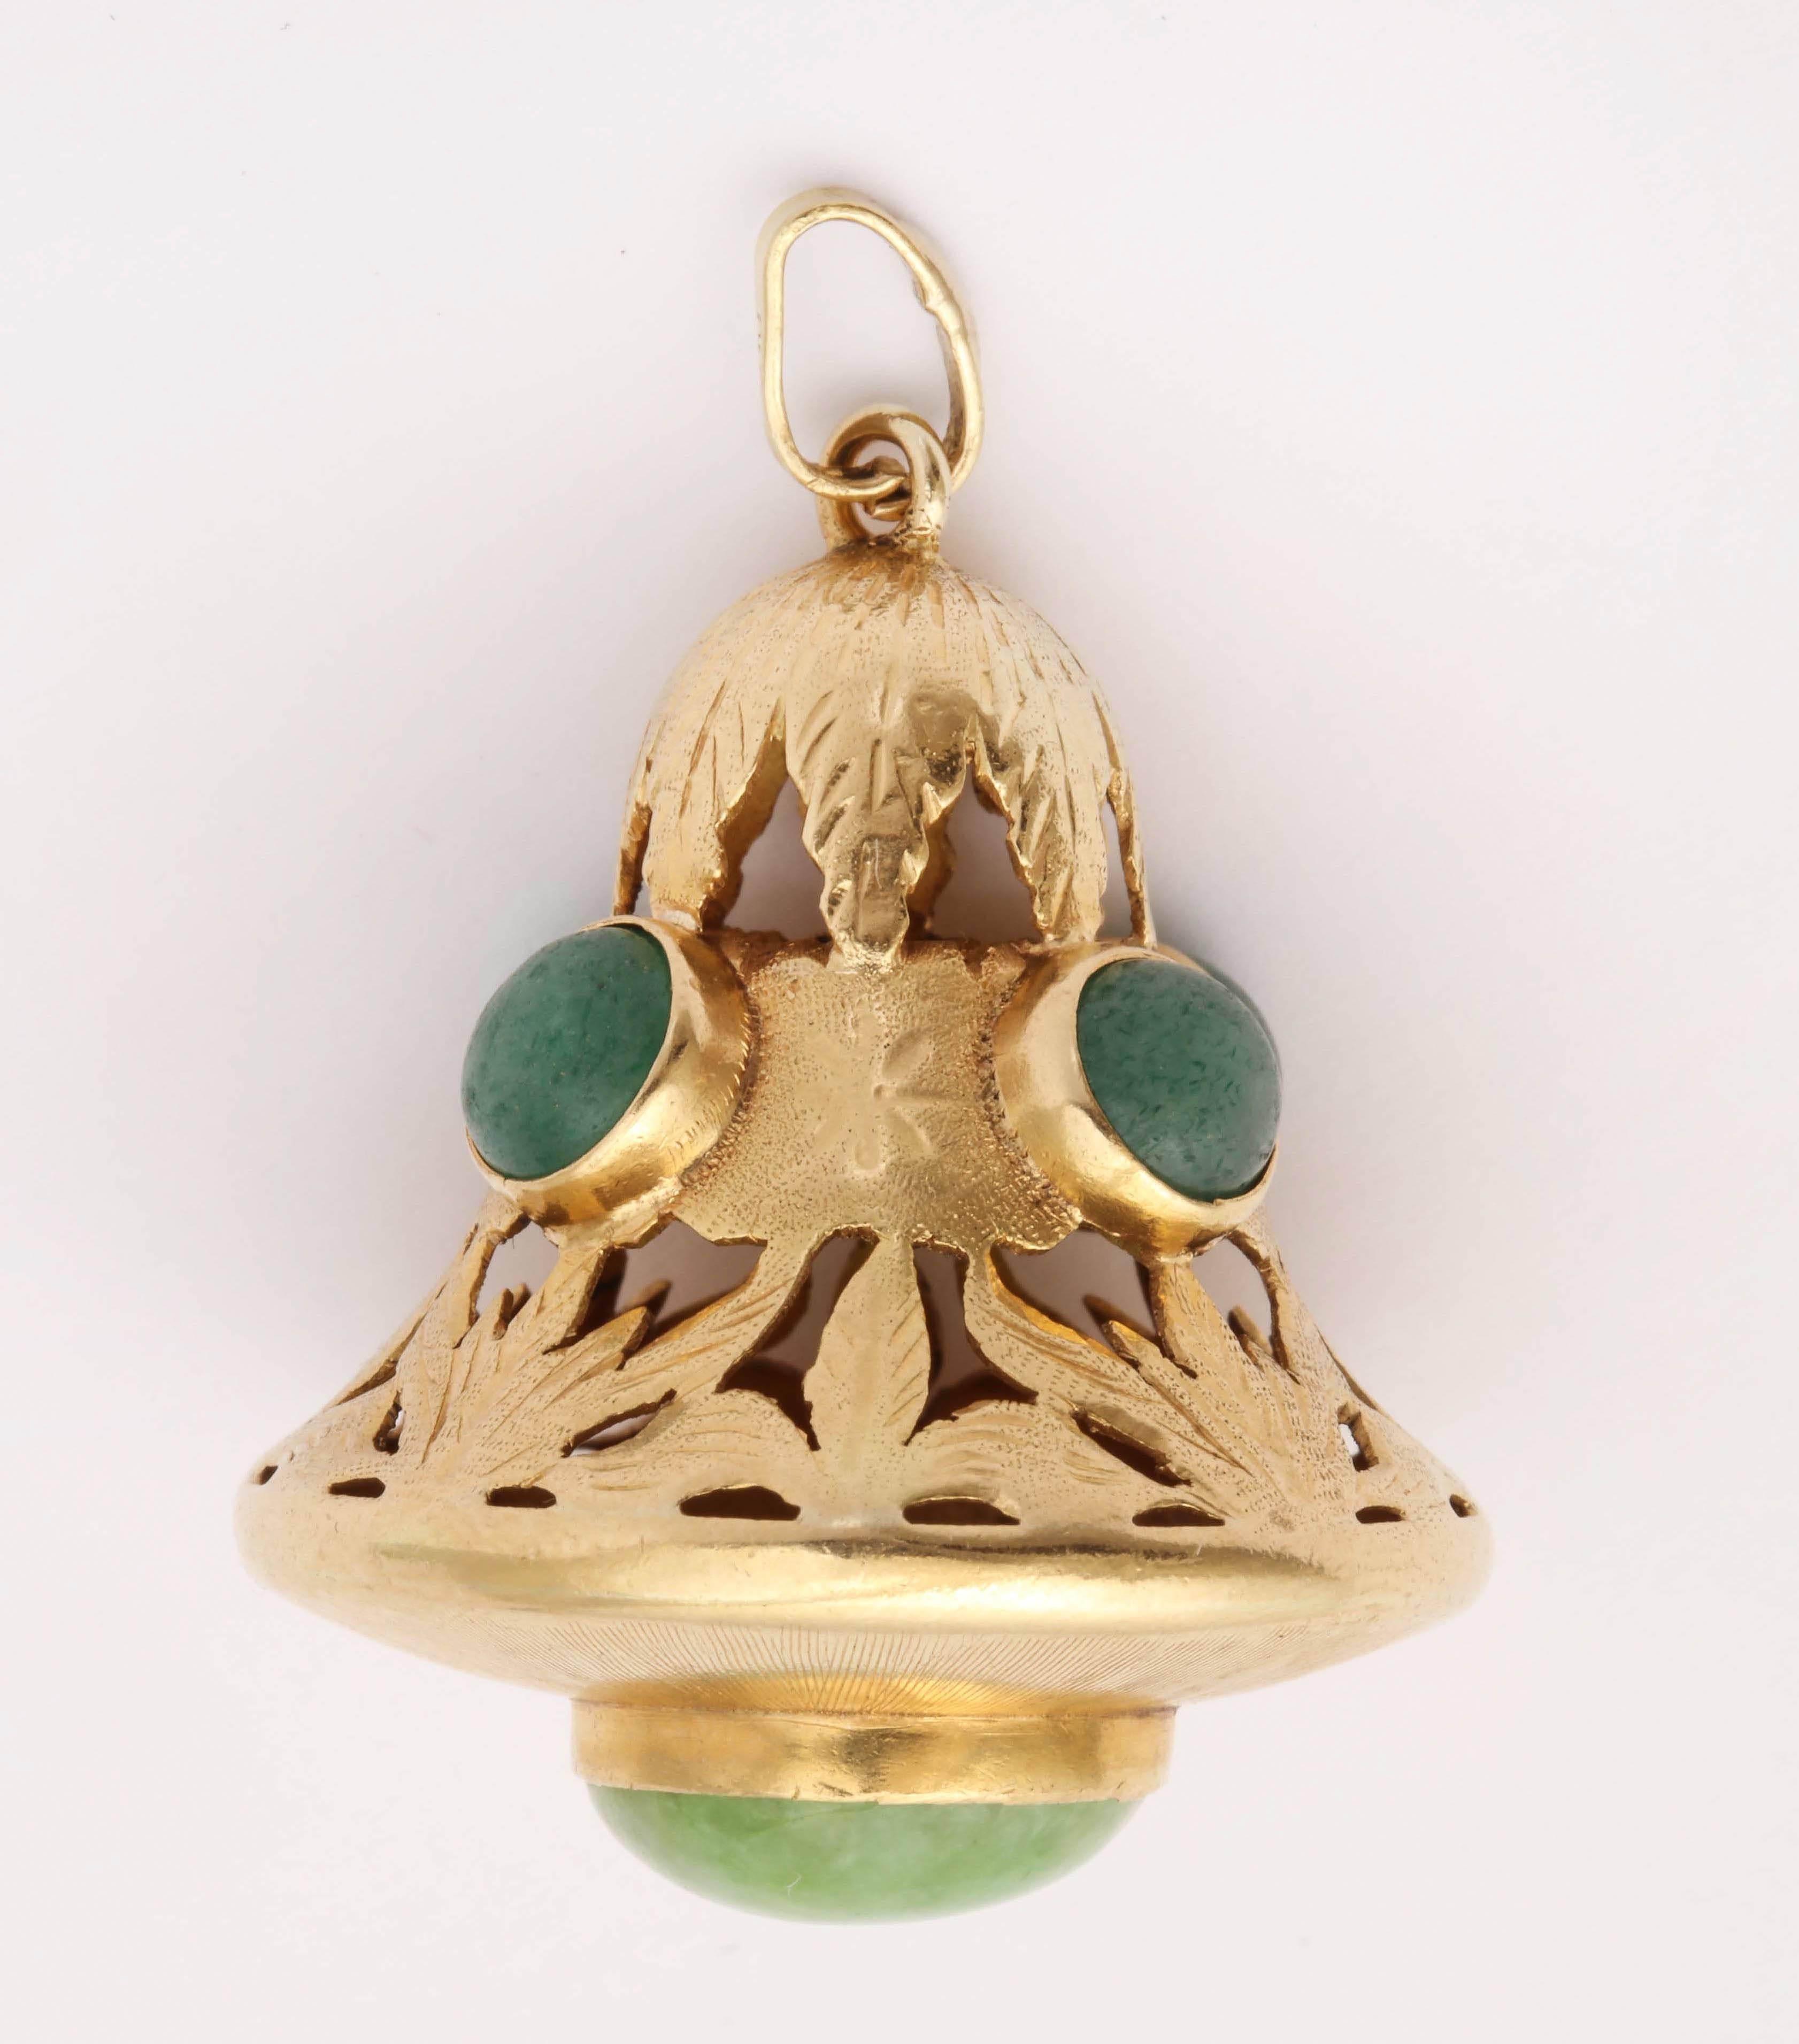 One 18kt Yellow Gold Charm Designed With Five Cabochon Green Quartz Stones.Charm Is Beautifully Made With Open Floral Design Craftmanship.Further Embellished With One Large Bezel Set Cabochon Green Quartz Stine Surrounded By A Beautiful Sunburst